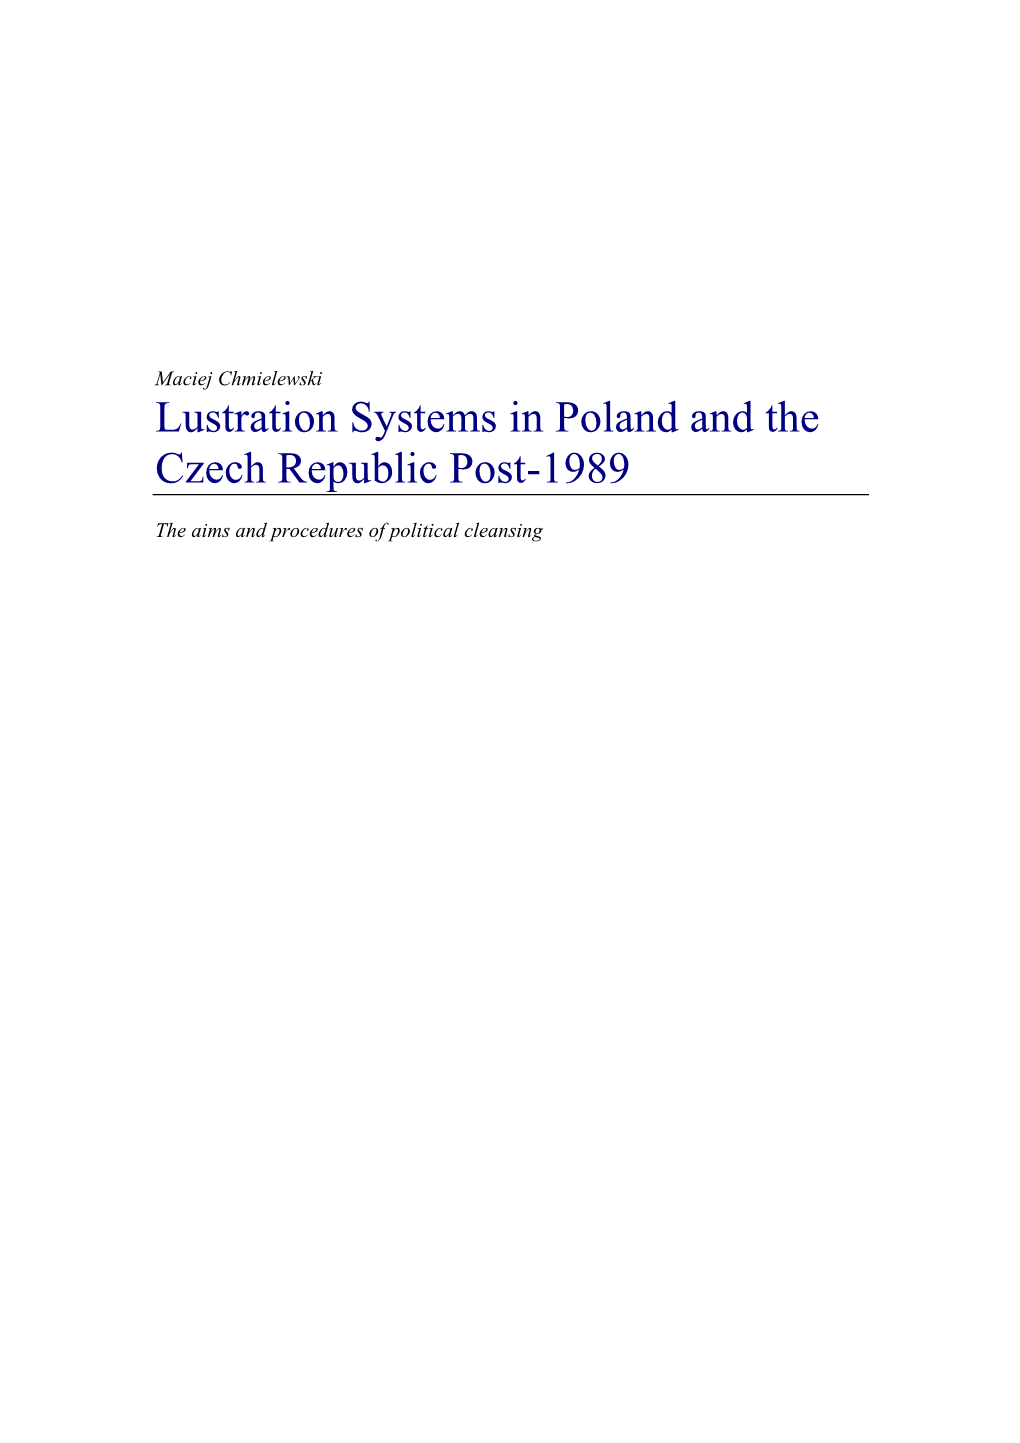 Lustration Systems in Poland and Czech Republic Post